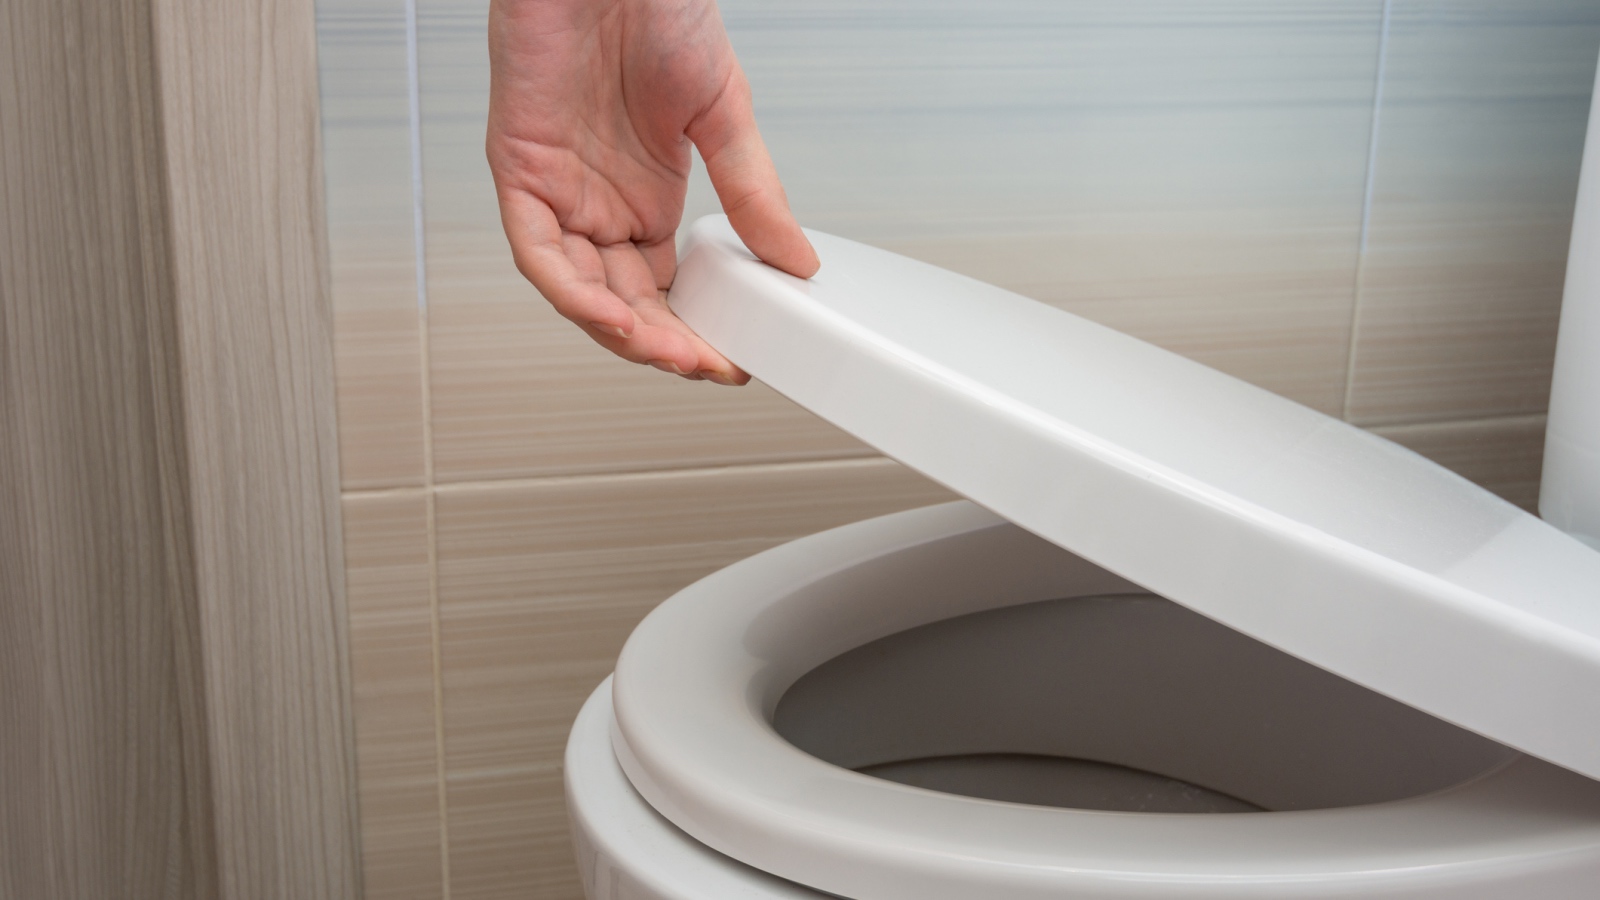 hand lifting a toilet seat